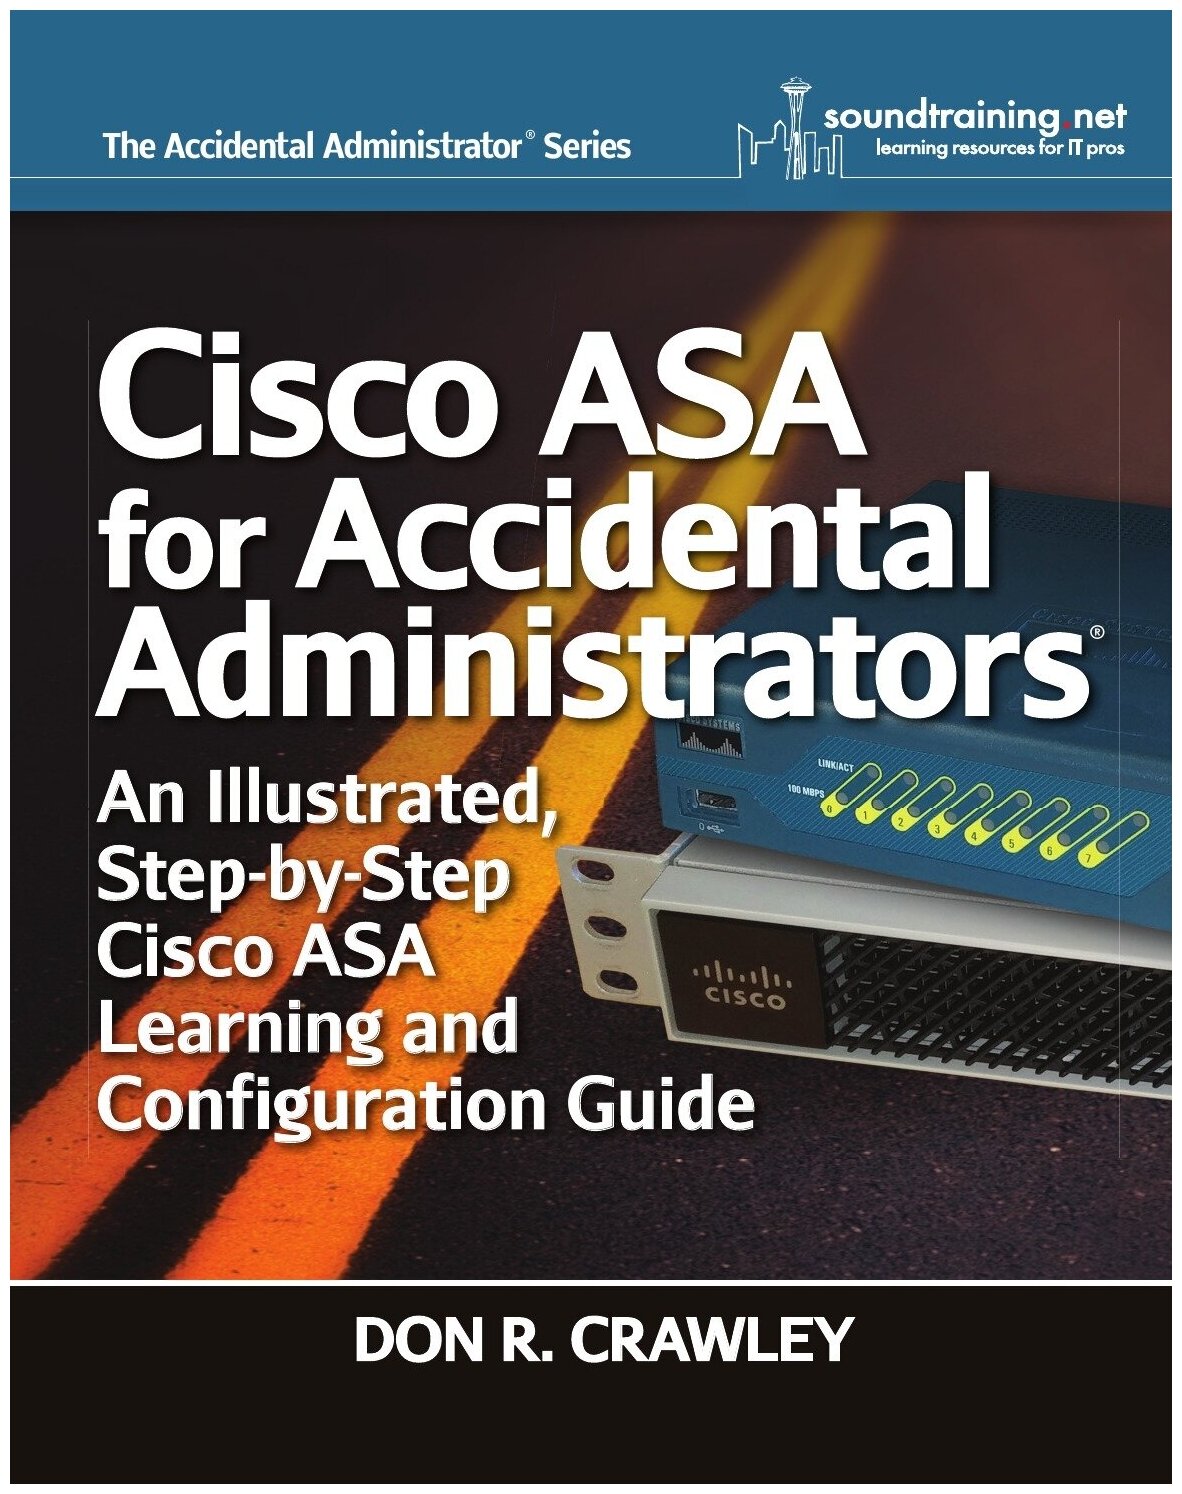 Cisco ASA for Accidental Administrators. An Illustrated Step-by-Step ASA Learning and Configuration Guide